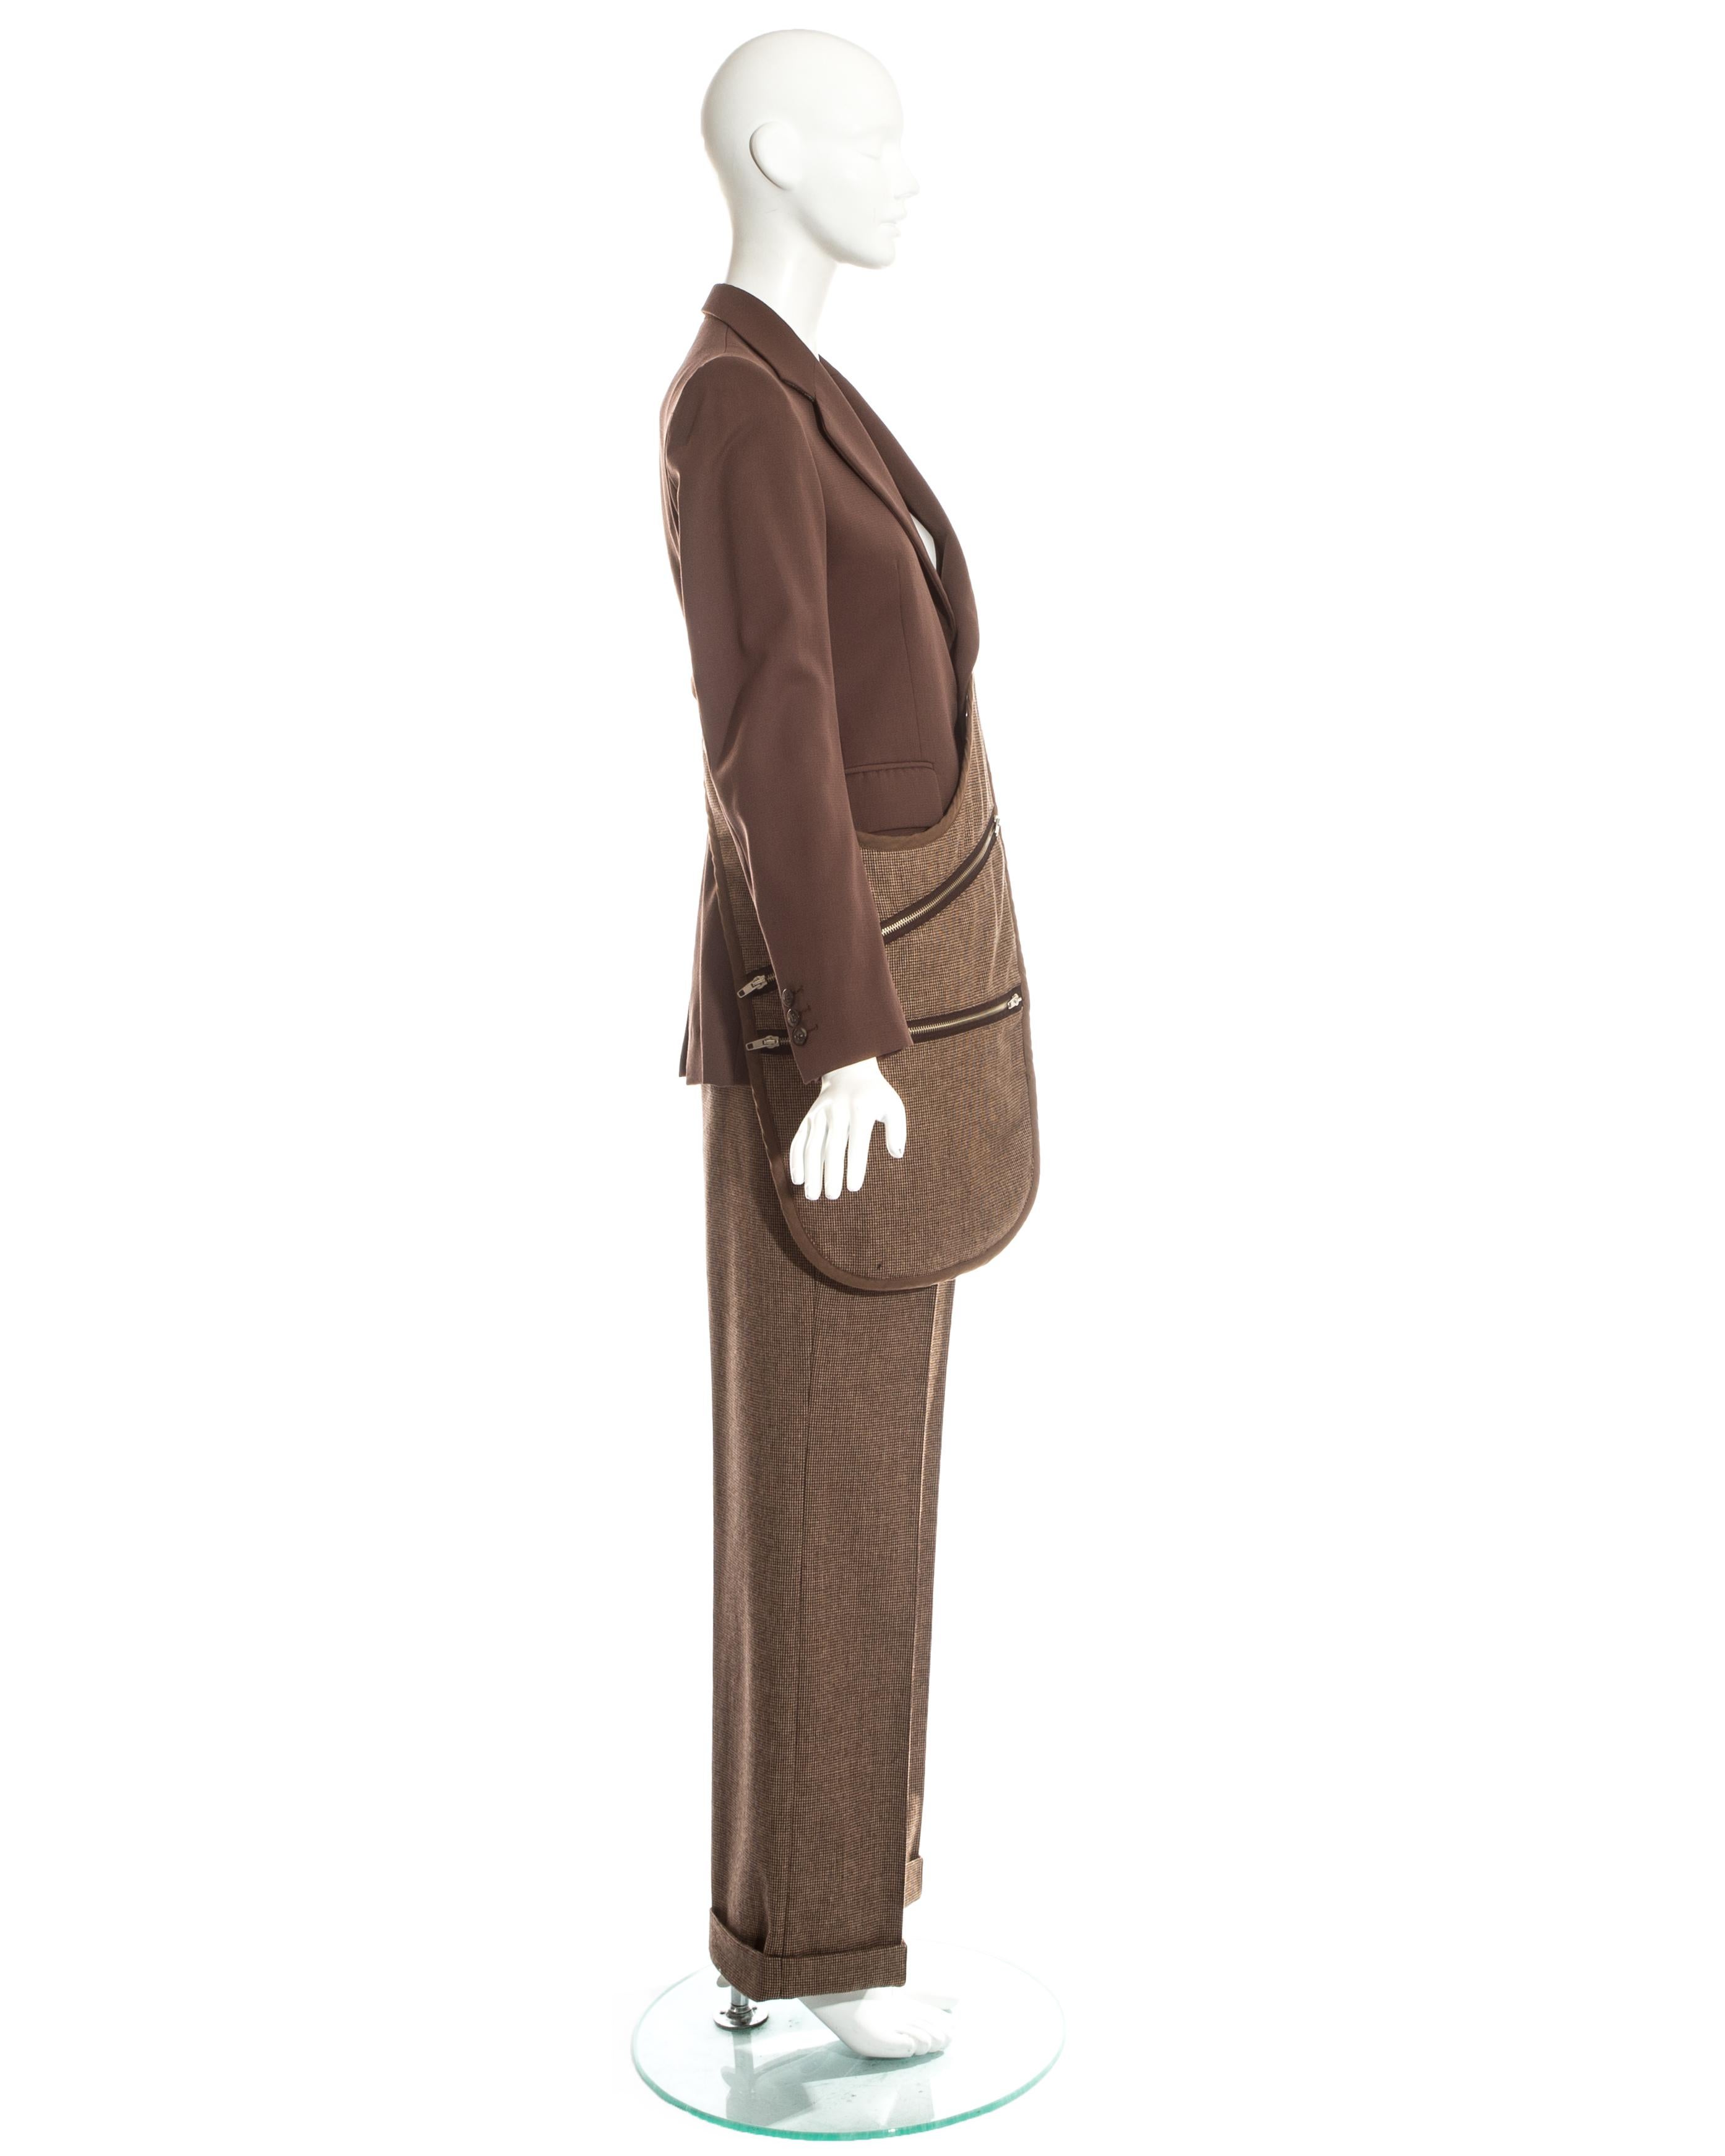 Margiela brown tweed wool pant suit with matching saddle bag, fw 1998 In Excellent Condition For Sale In London, GB